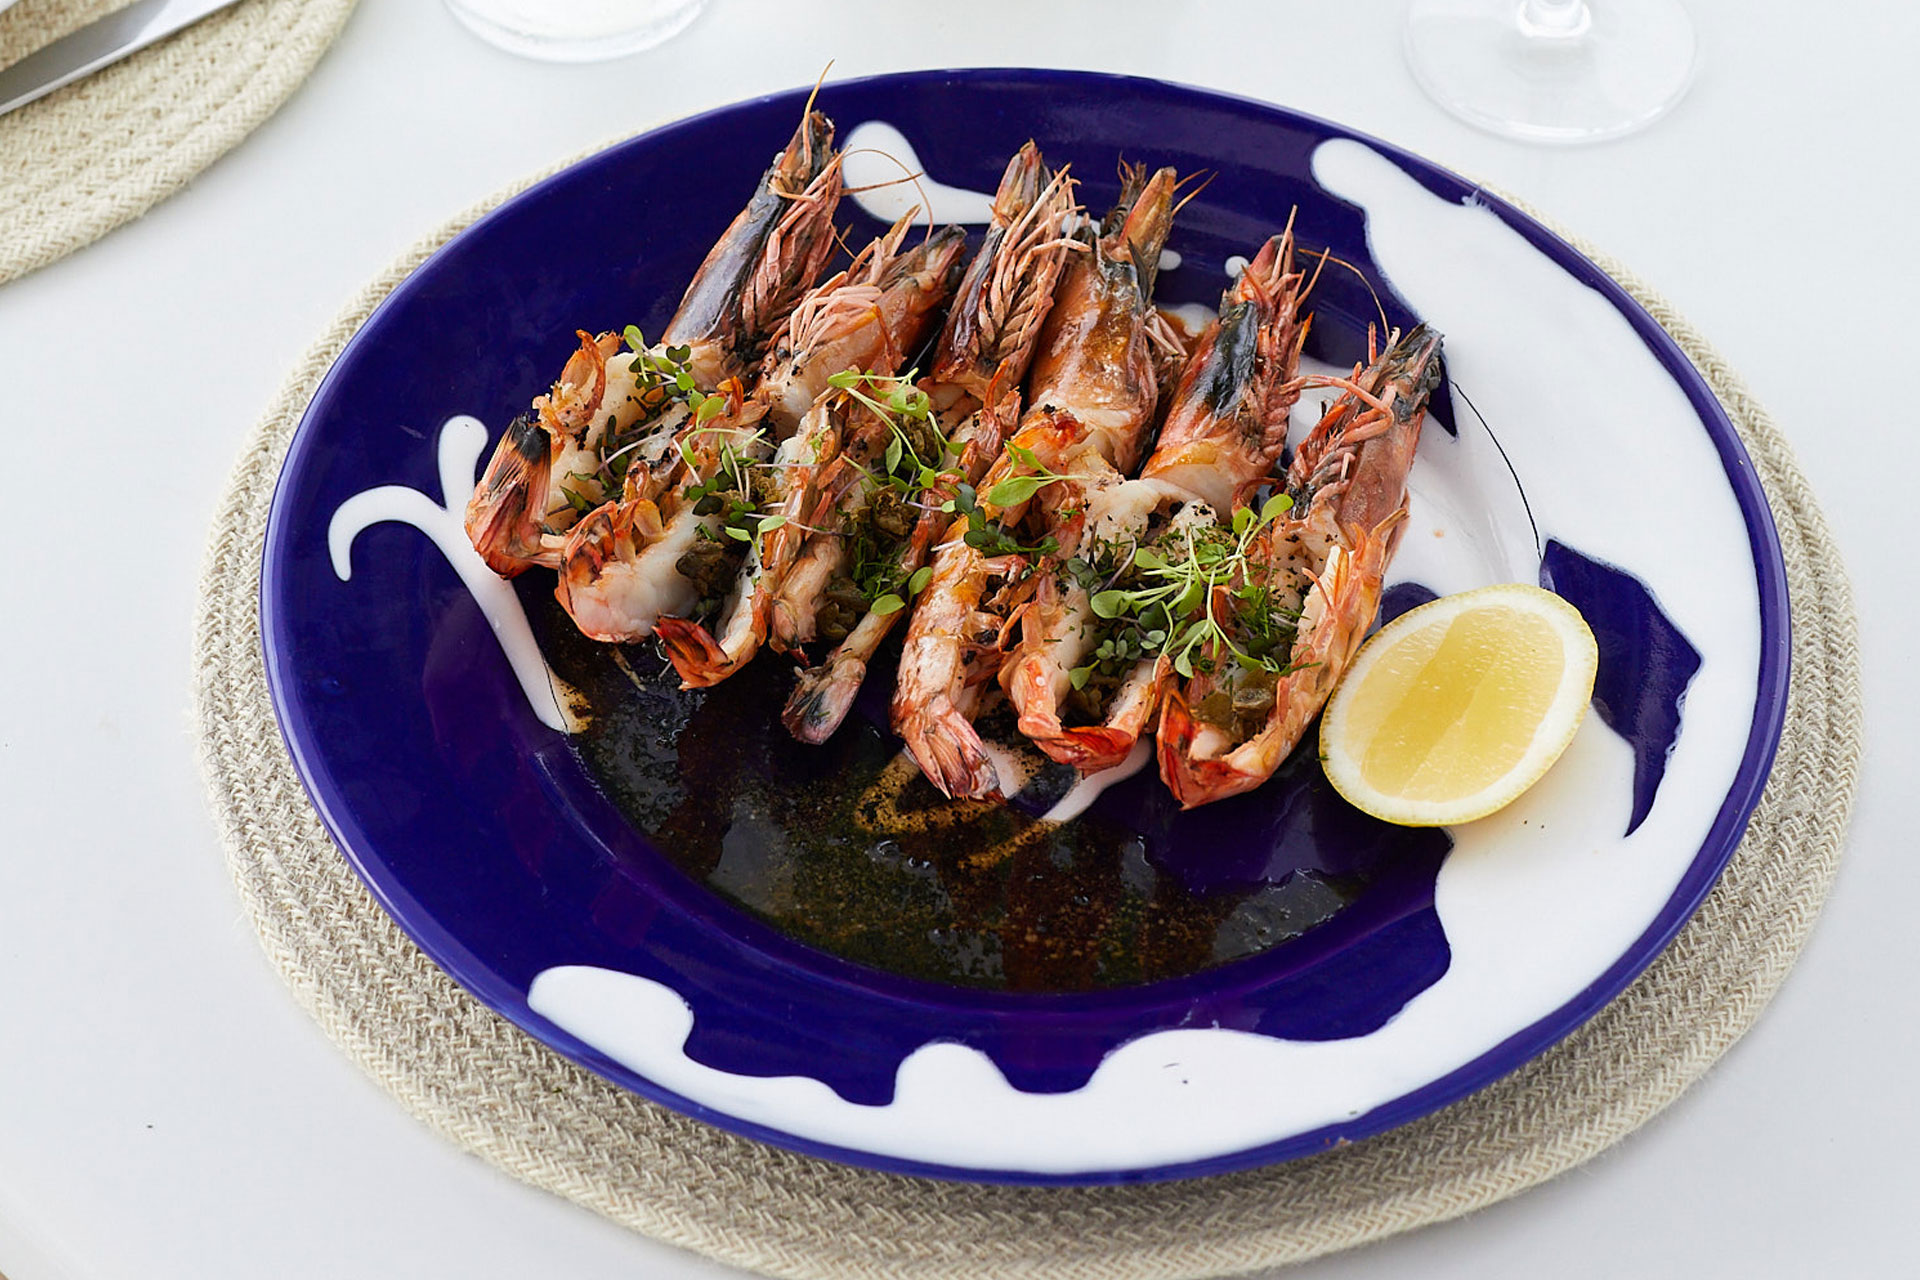 Spend Your Time In The Whitsundays Feasting On A Seafood Lunch